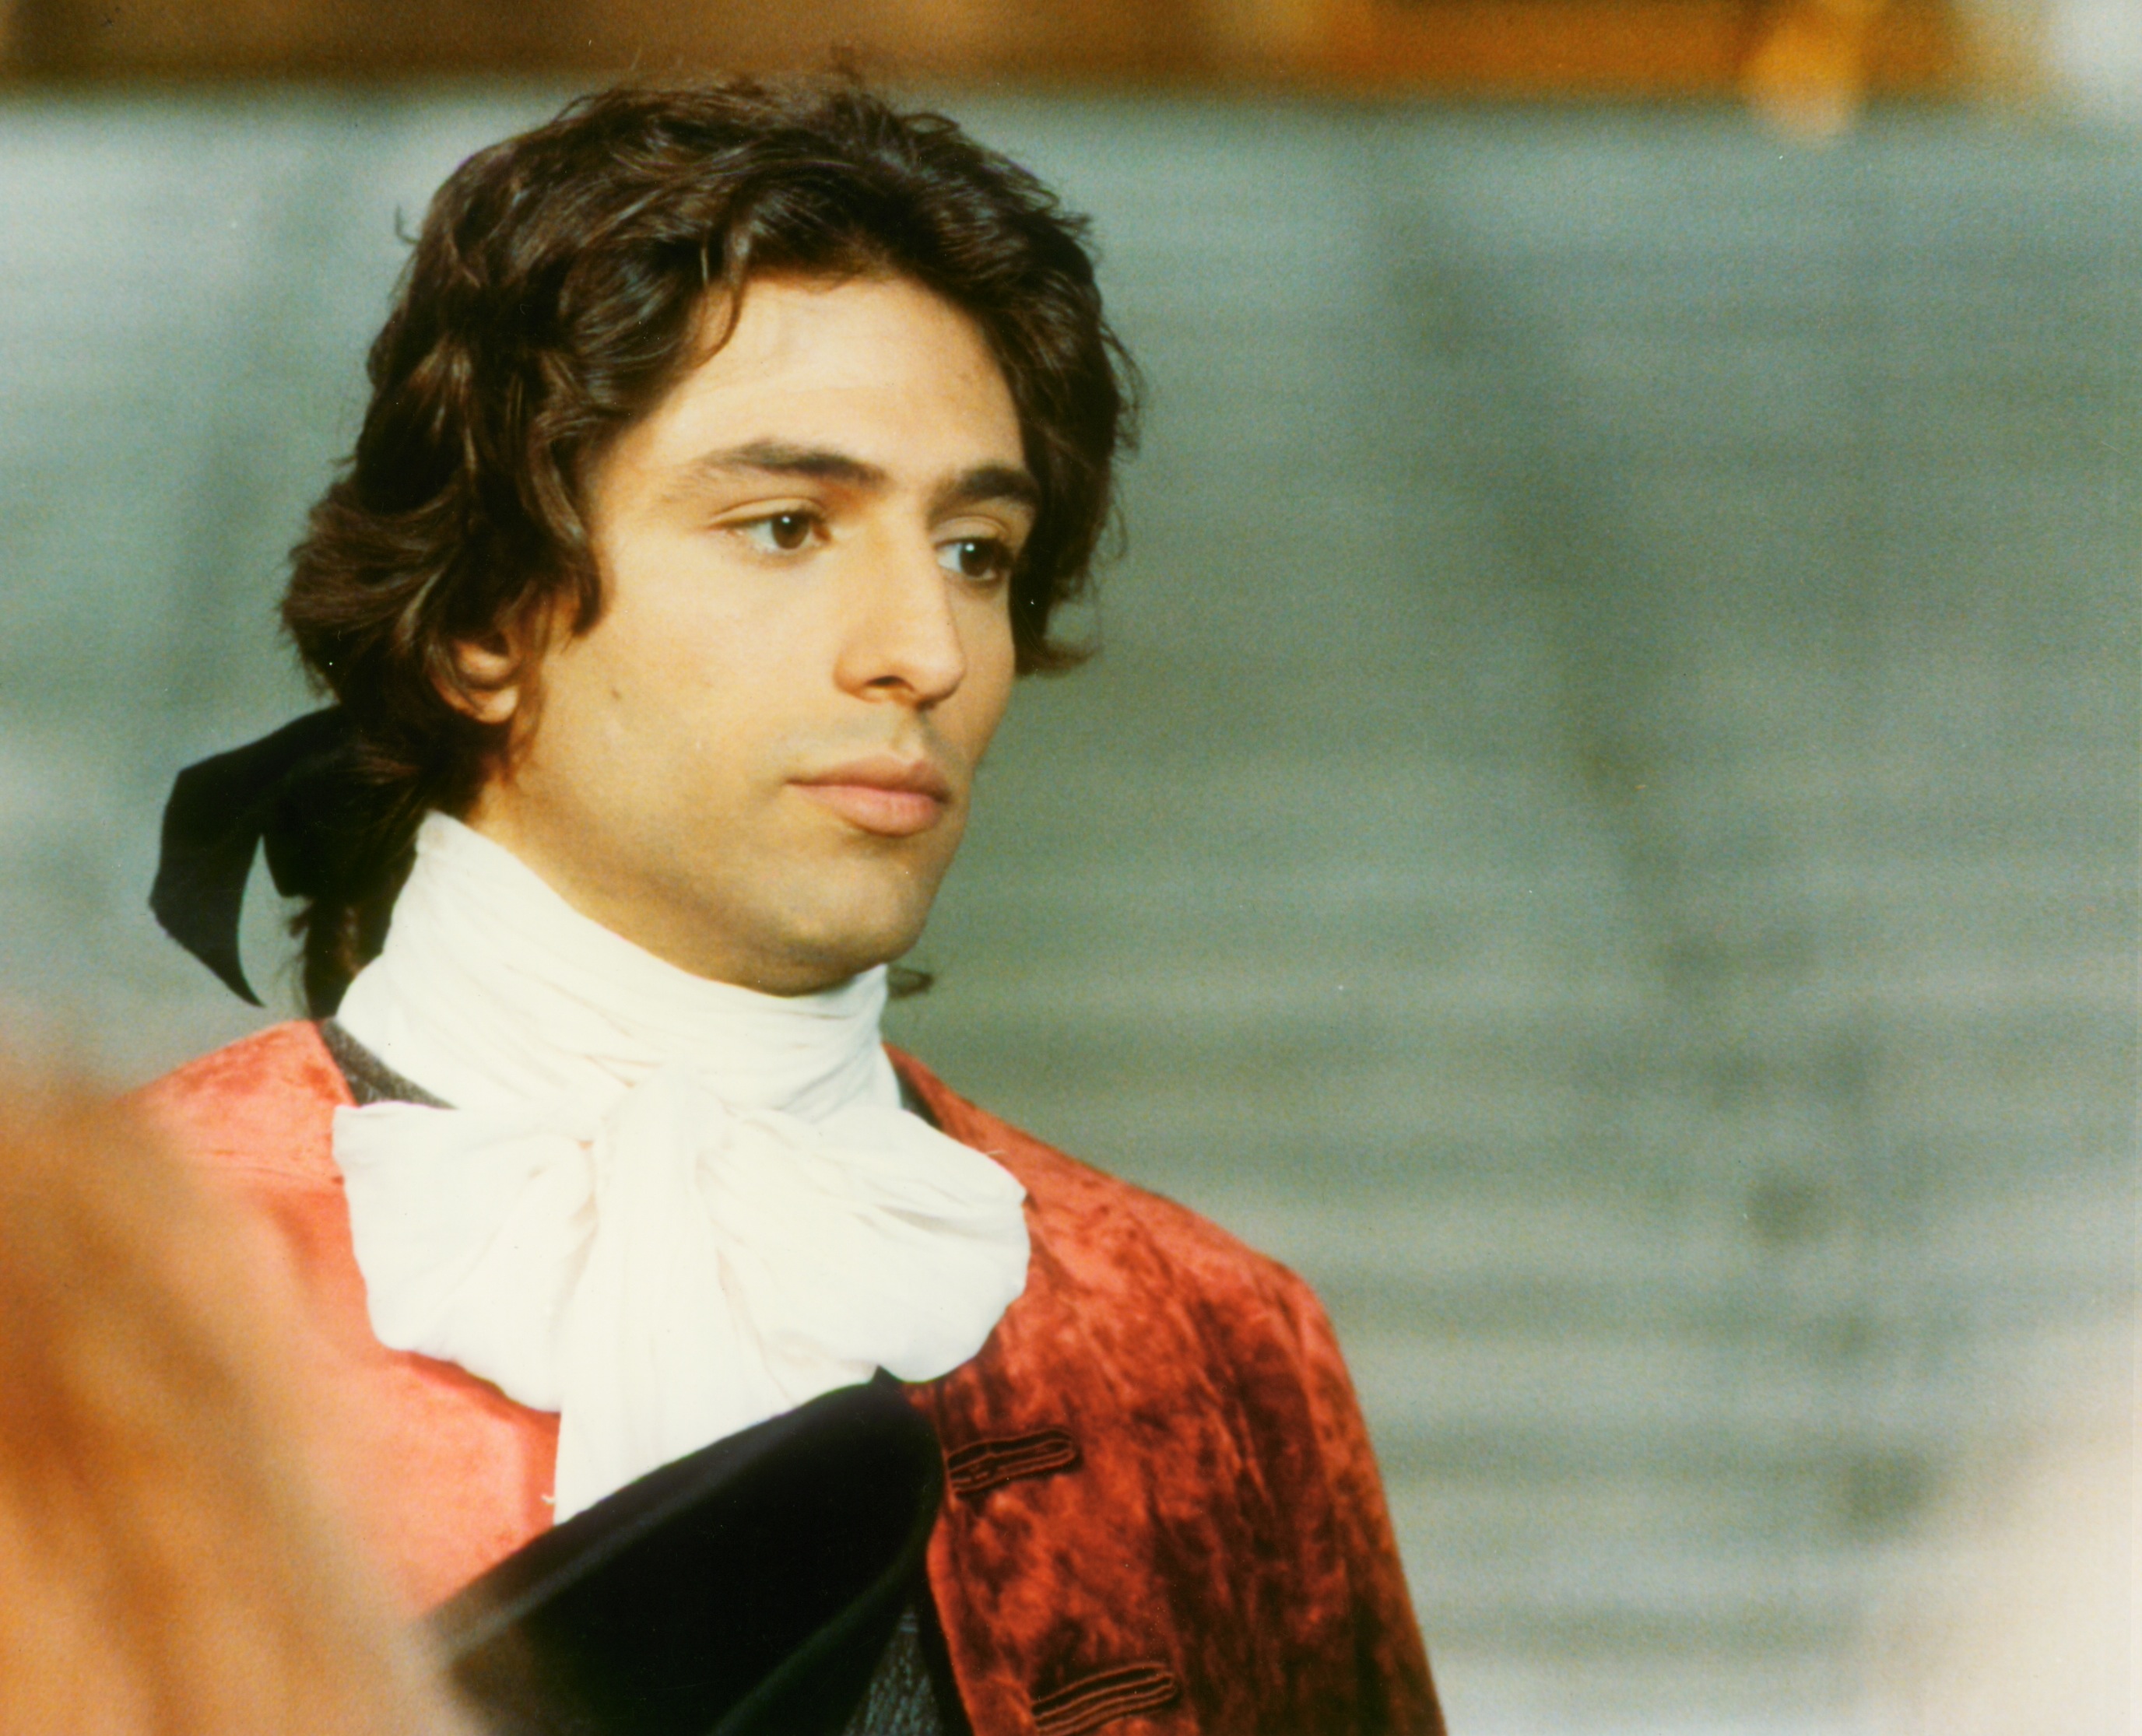 As Carlo Goldoni in Rouge Venise [Venetian Red]